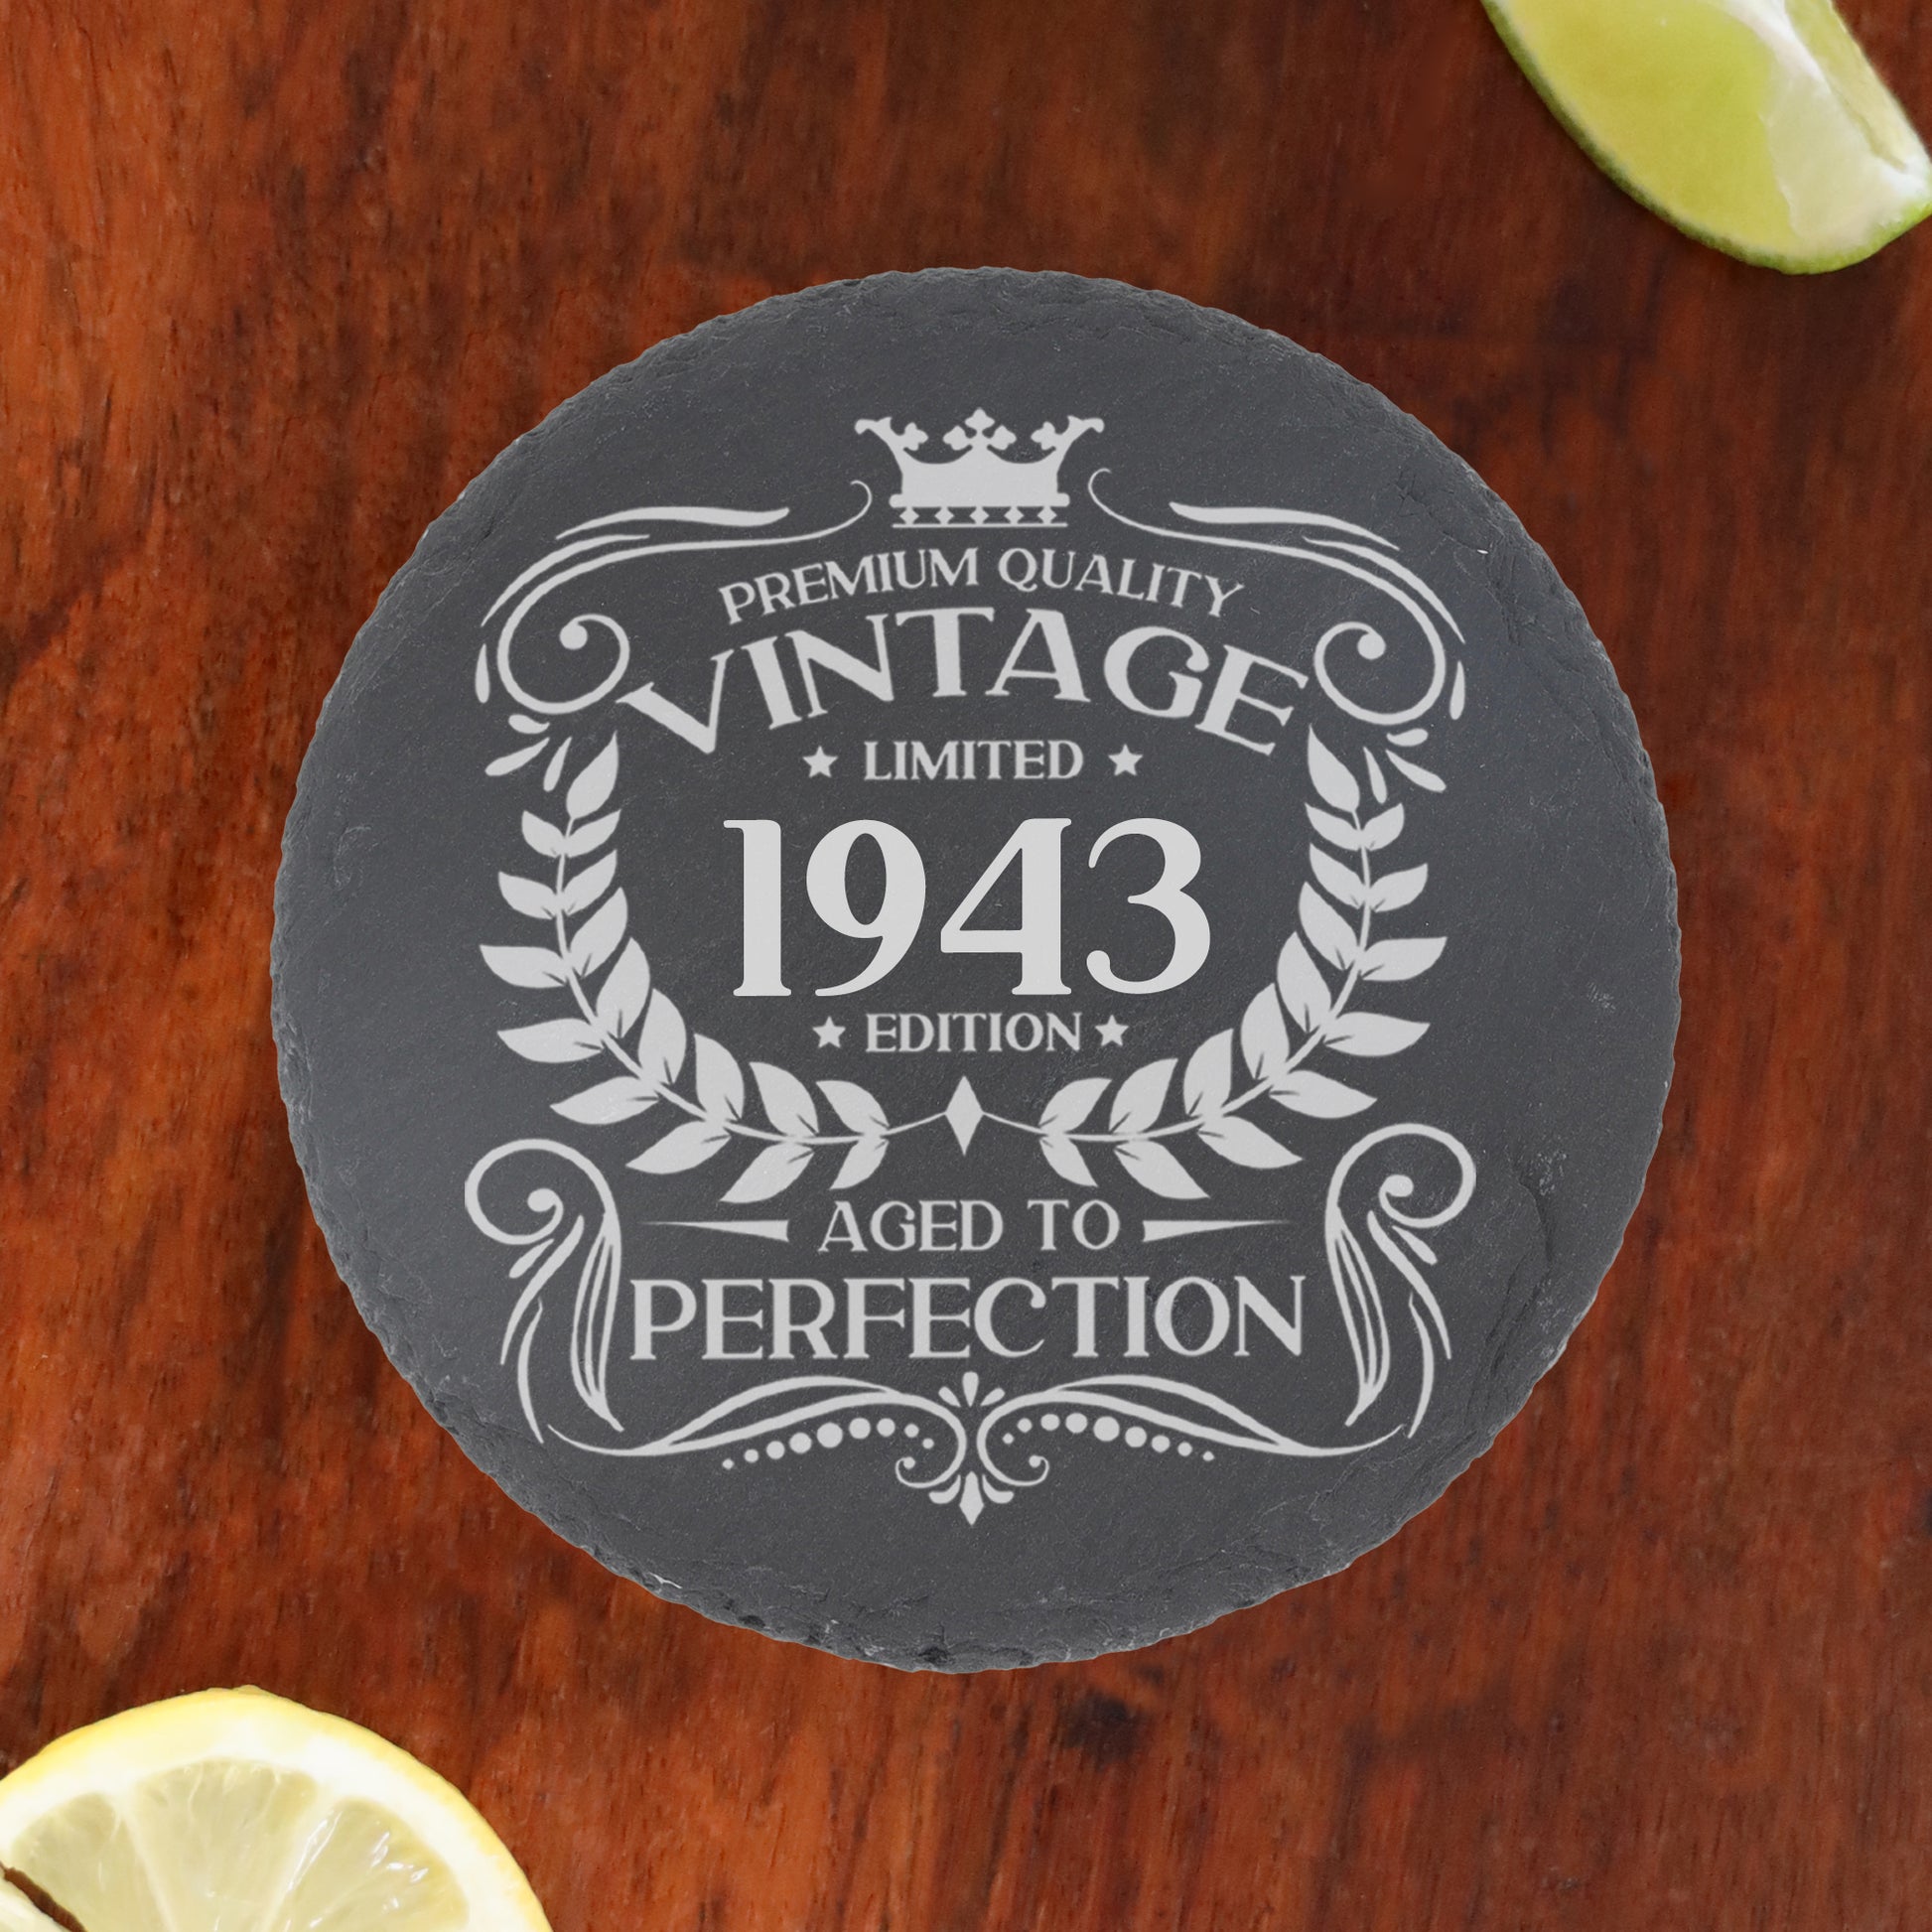 Personalised Vintage 1943 Mug and/or Coaster  - Always Looking Good - Round Coaster On Its Own  